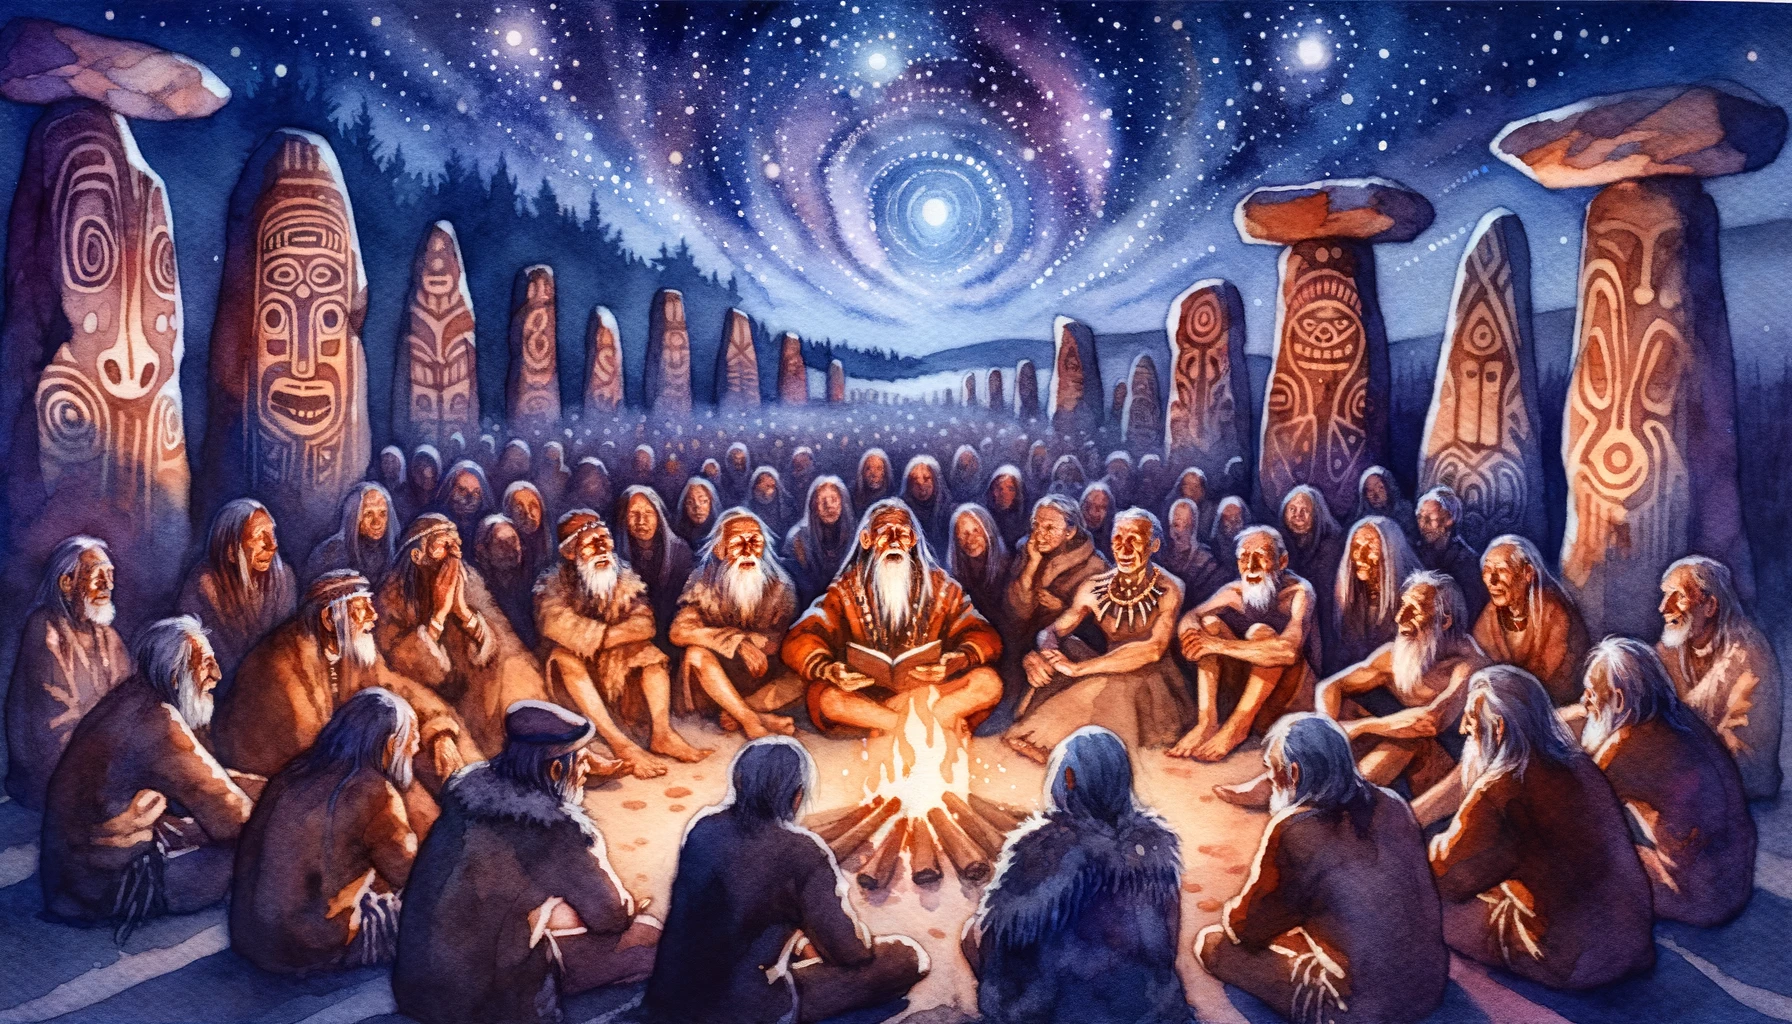 Ancient people around a fire, elders pass down divine knowledge orally. Ancient structures hint at early spiritual practices.